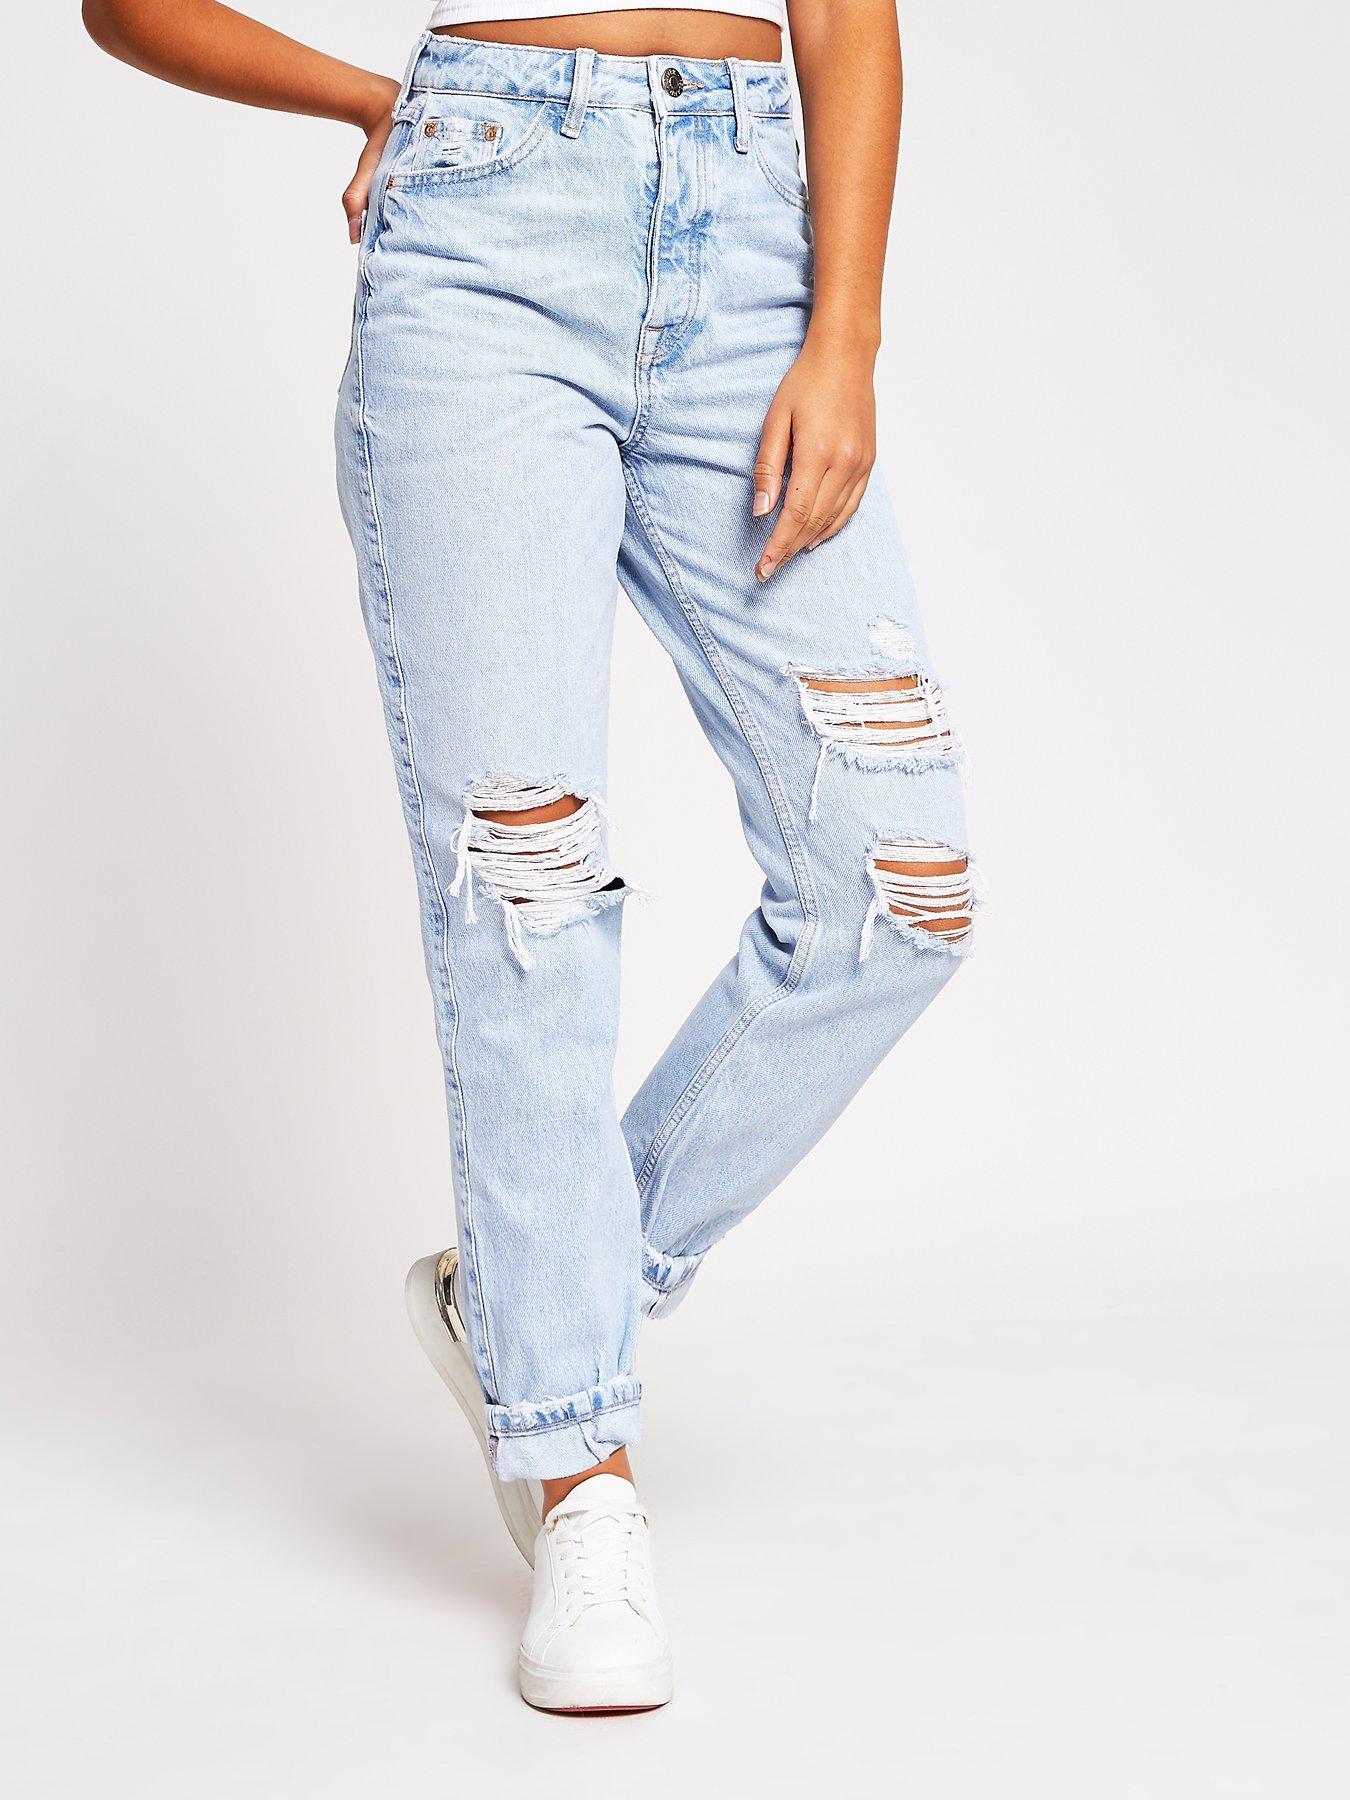 high waisted ripped mom jeans uk